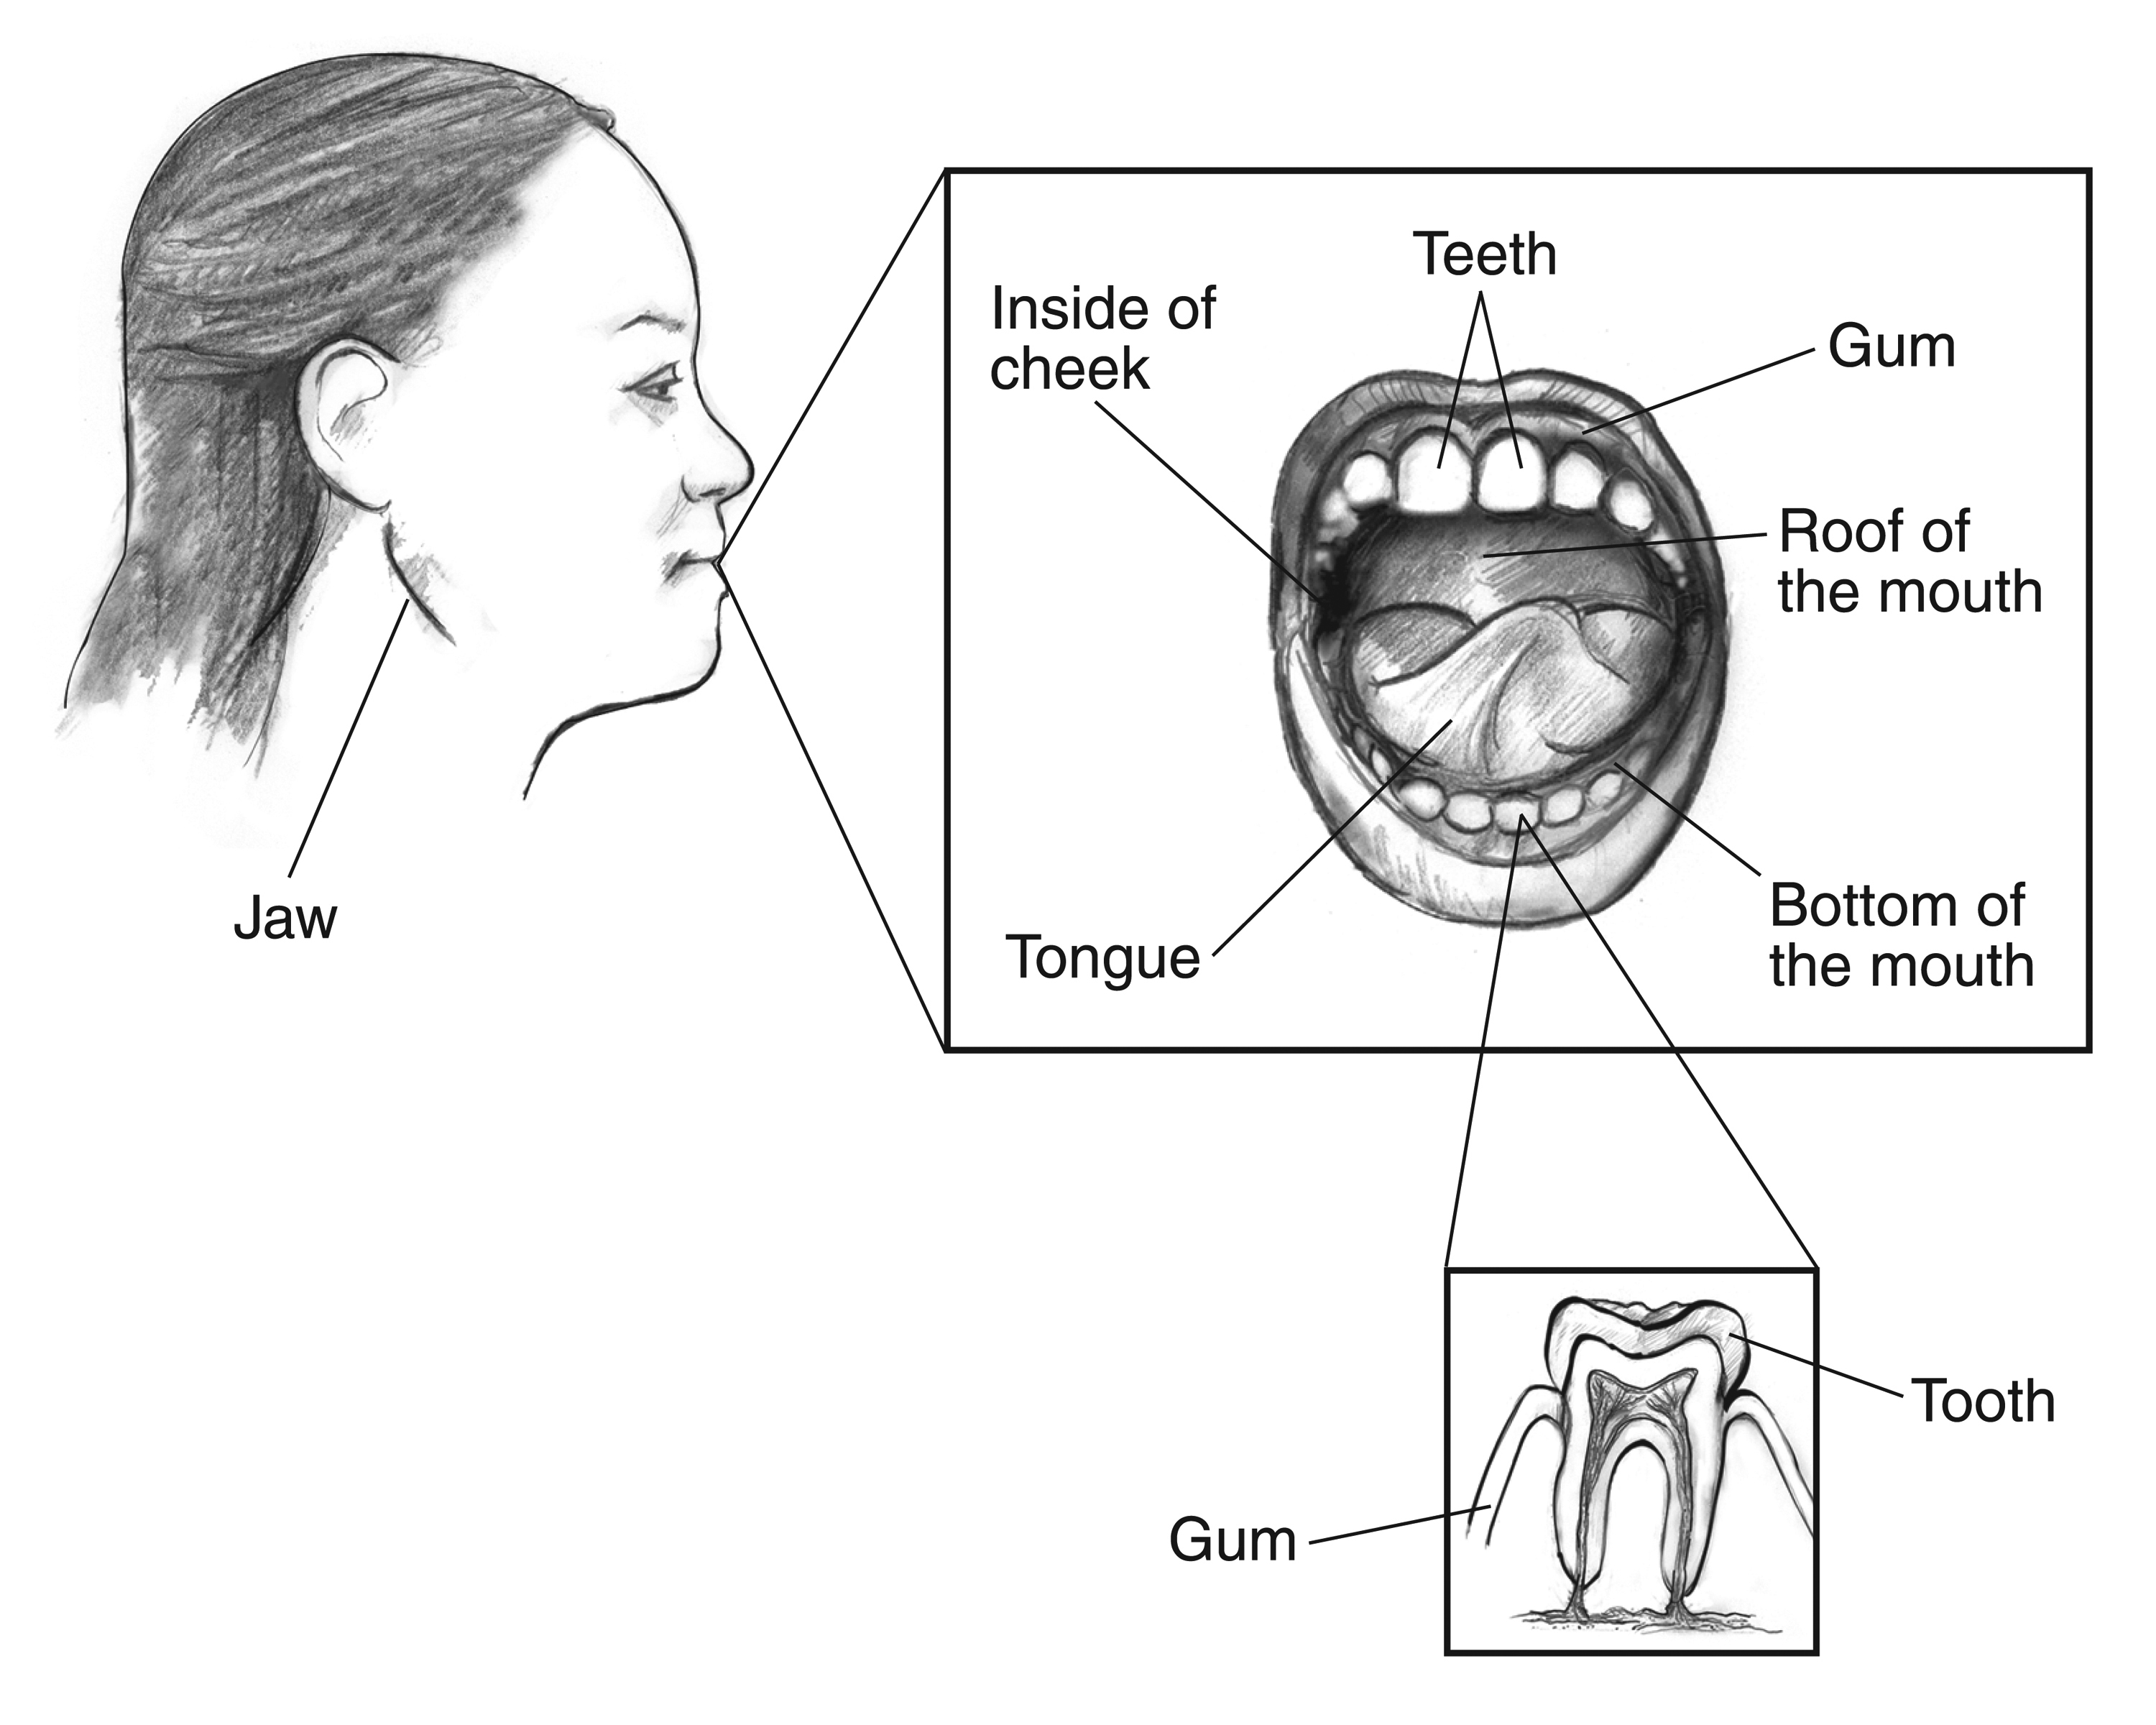 Woman's face with the jaw labeled - Media Asset - NIDDK